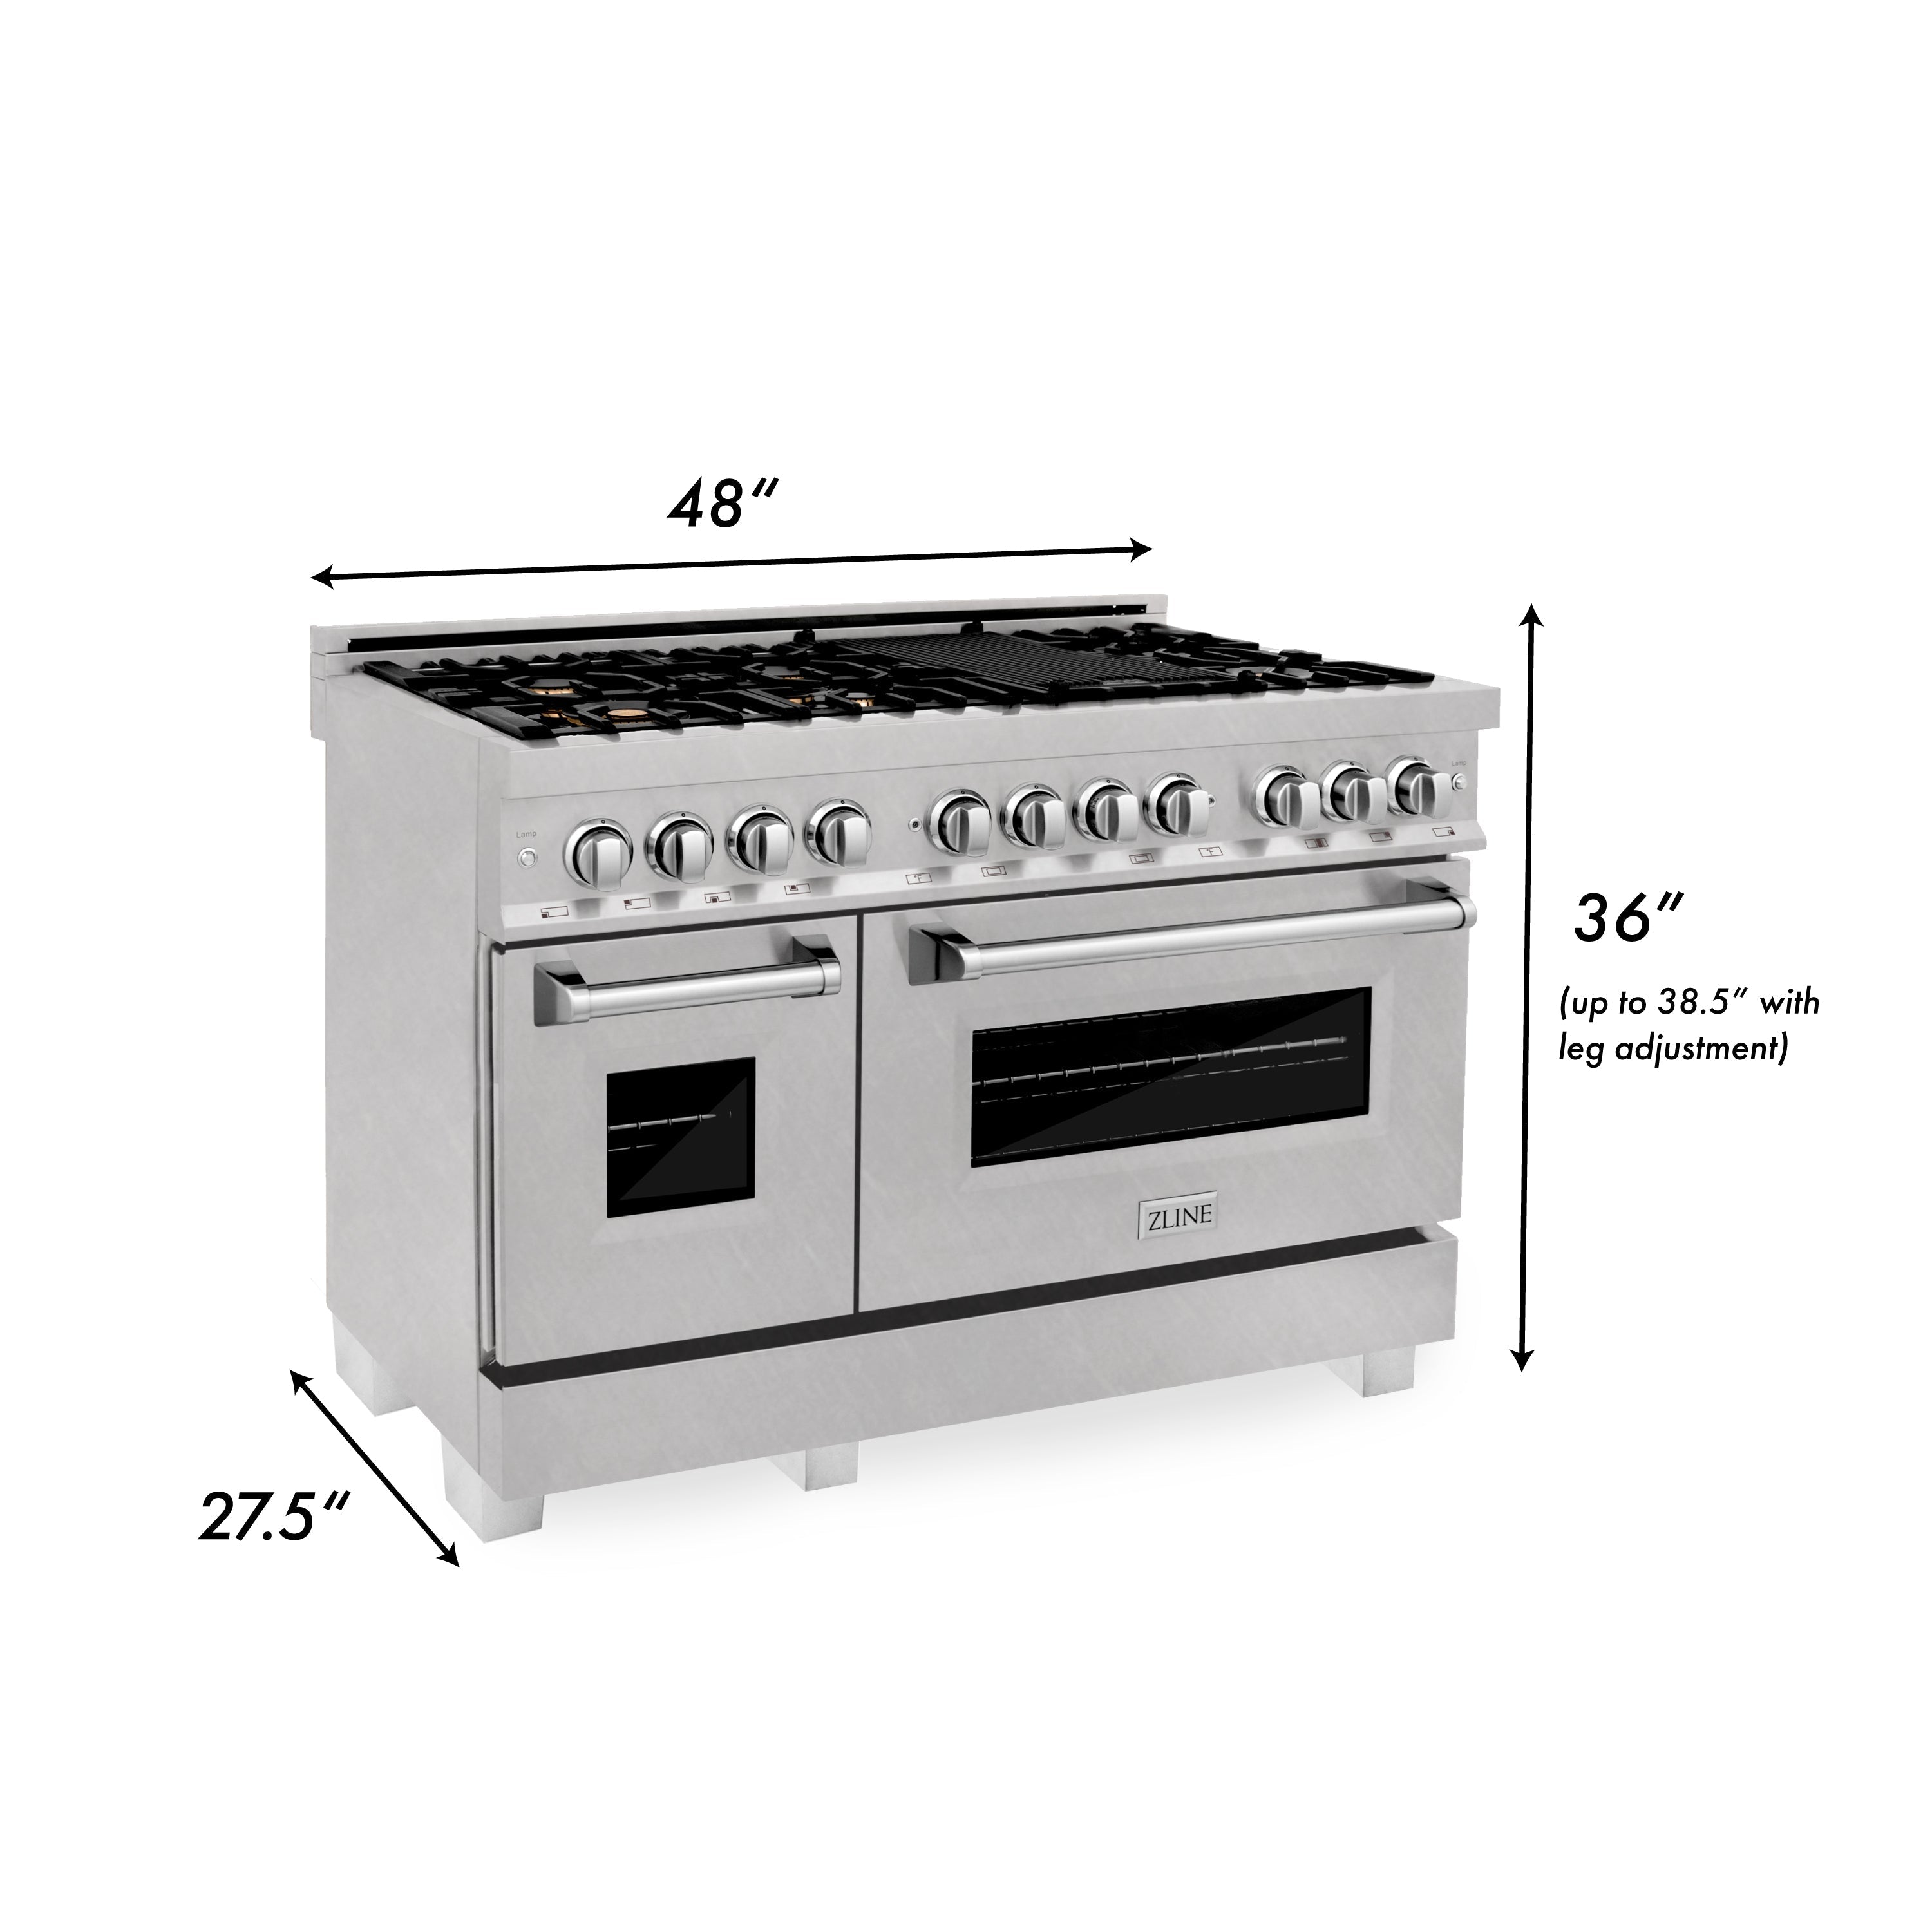 ZLINE 48" 6.0 cu. ft. Electric Oven and Gas Cooktop Dual Fuel Range with Griddle and Brass Burners in Fingerprint Resistant Stainless (RAS-SN-BR-GR-48)